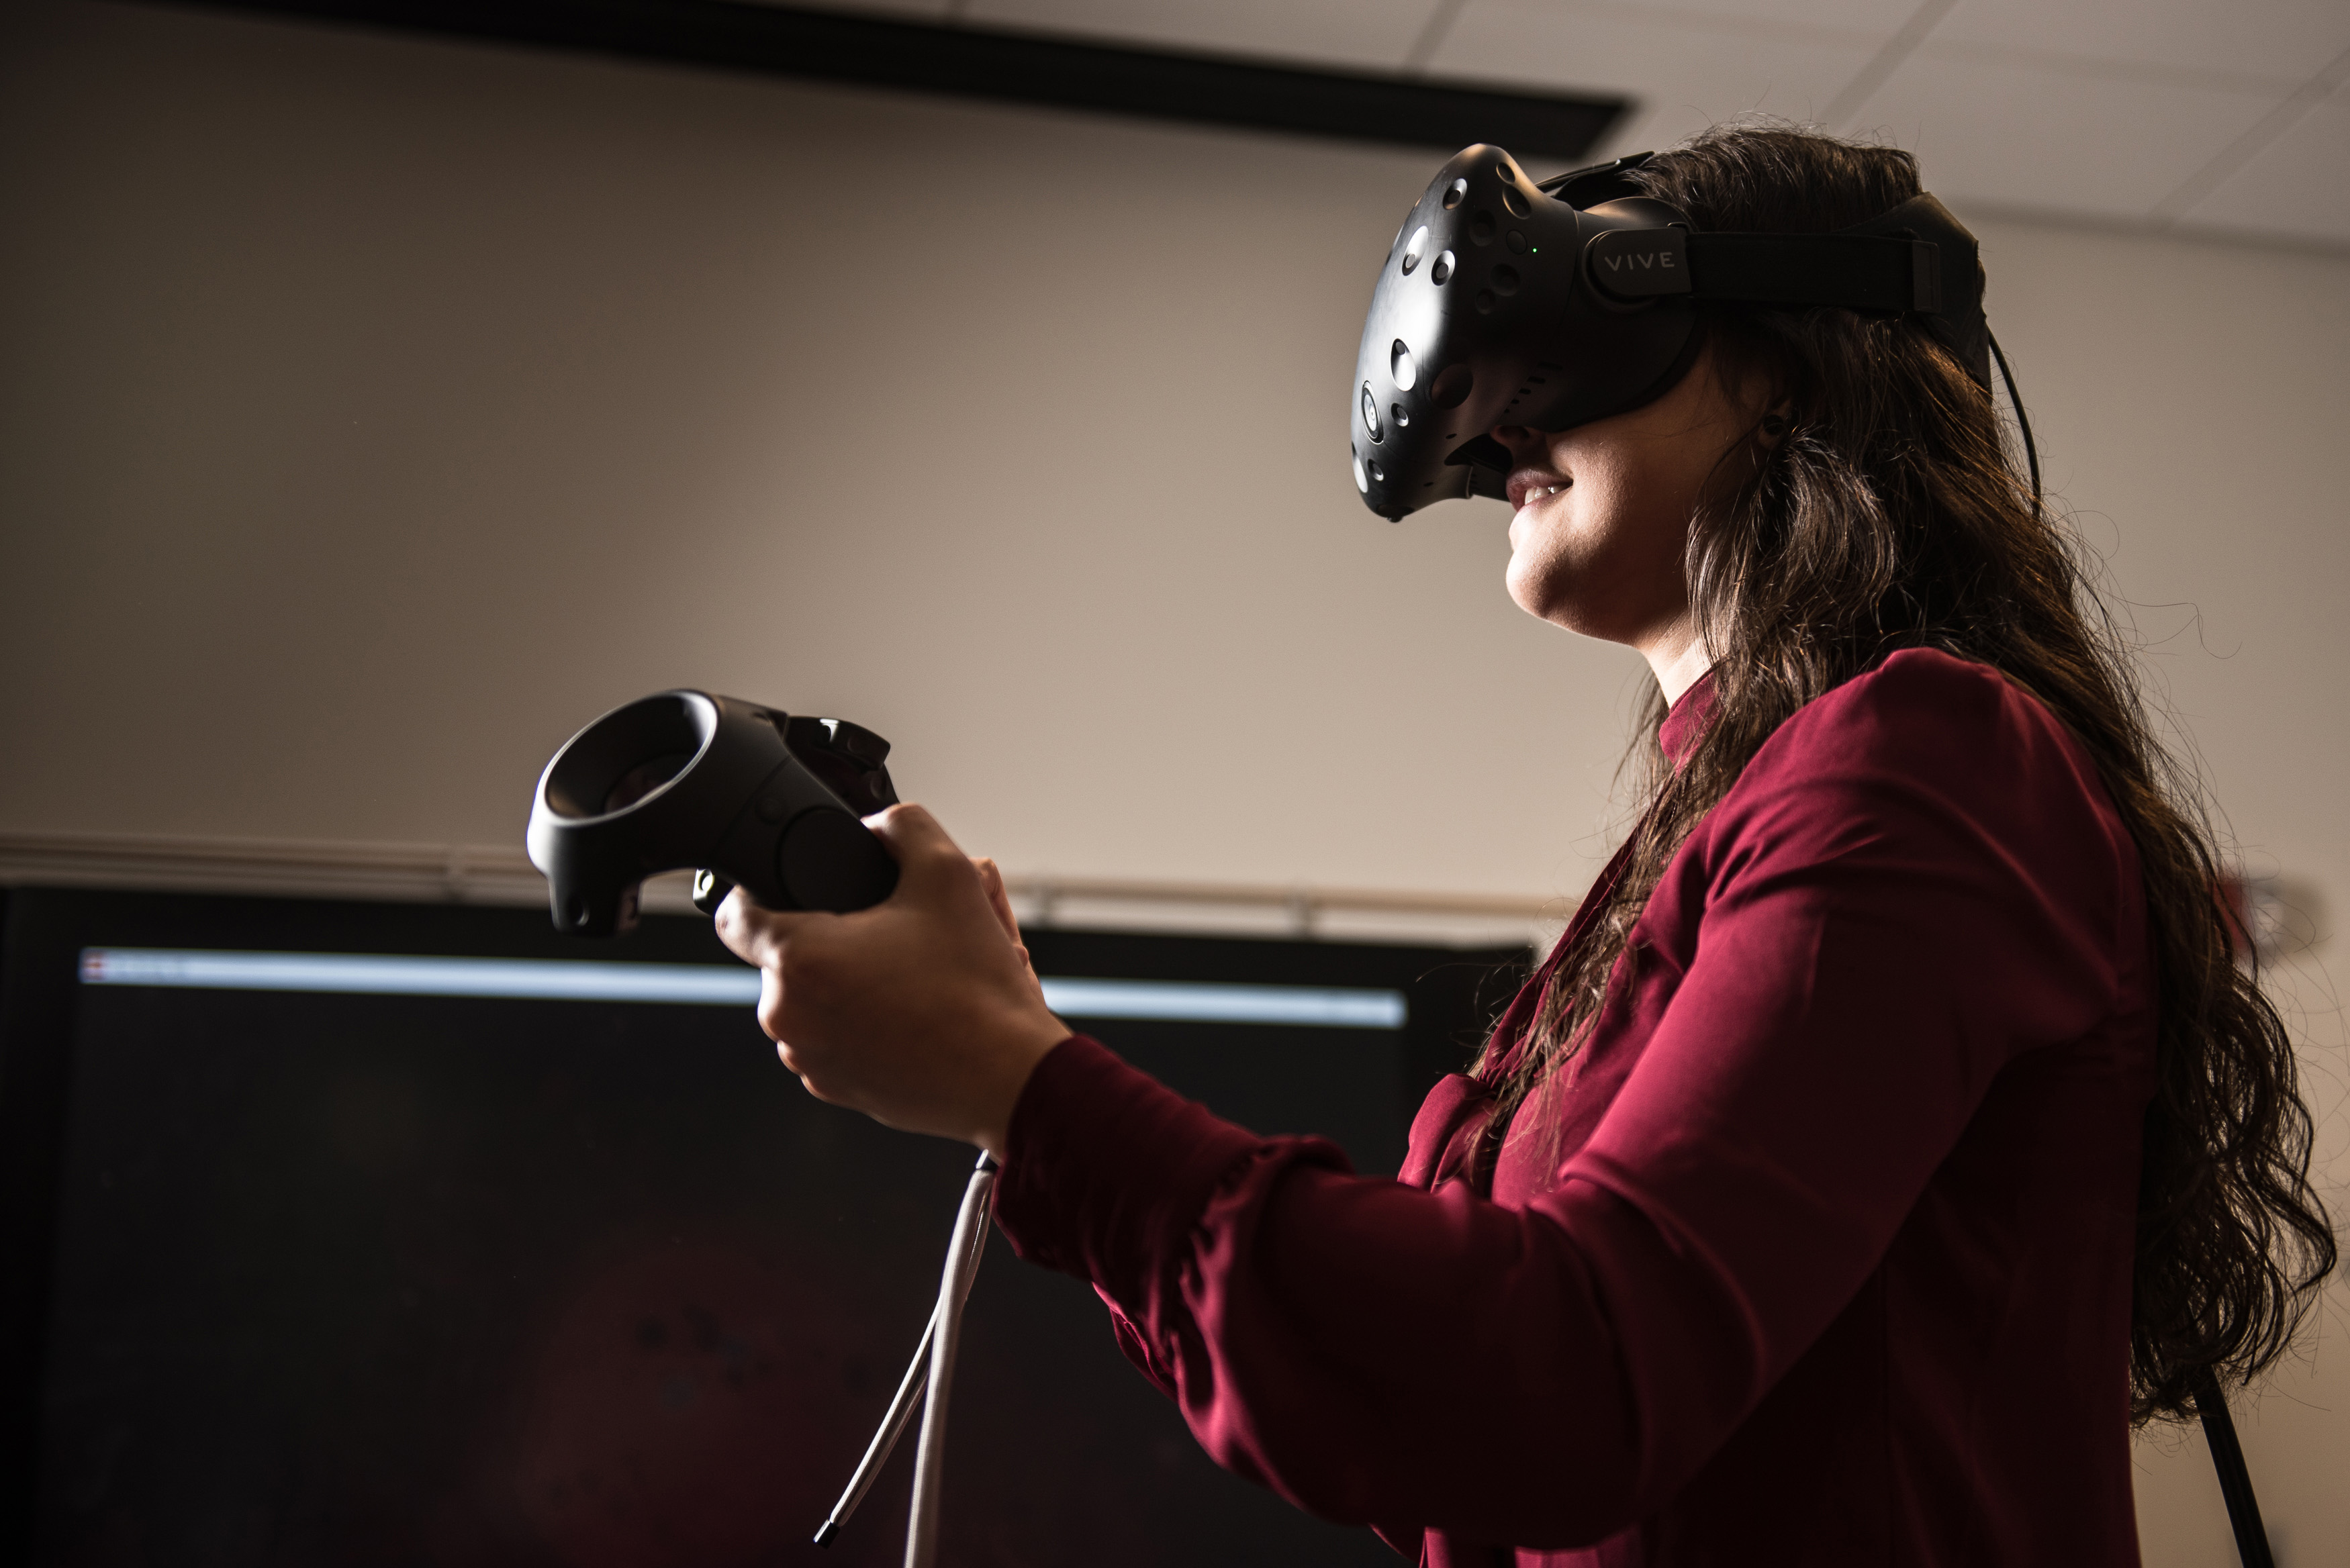 With a virtual reality headset on, junior Carina Zamudio ’19 (CLAS) spent part of a Friday afternoon trying to slay villains who were intent on breaching the security around a virtual castle. (Nathan Oldham/UConn School of Business Photo)